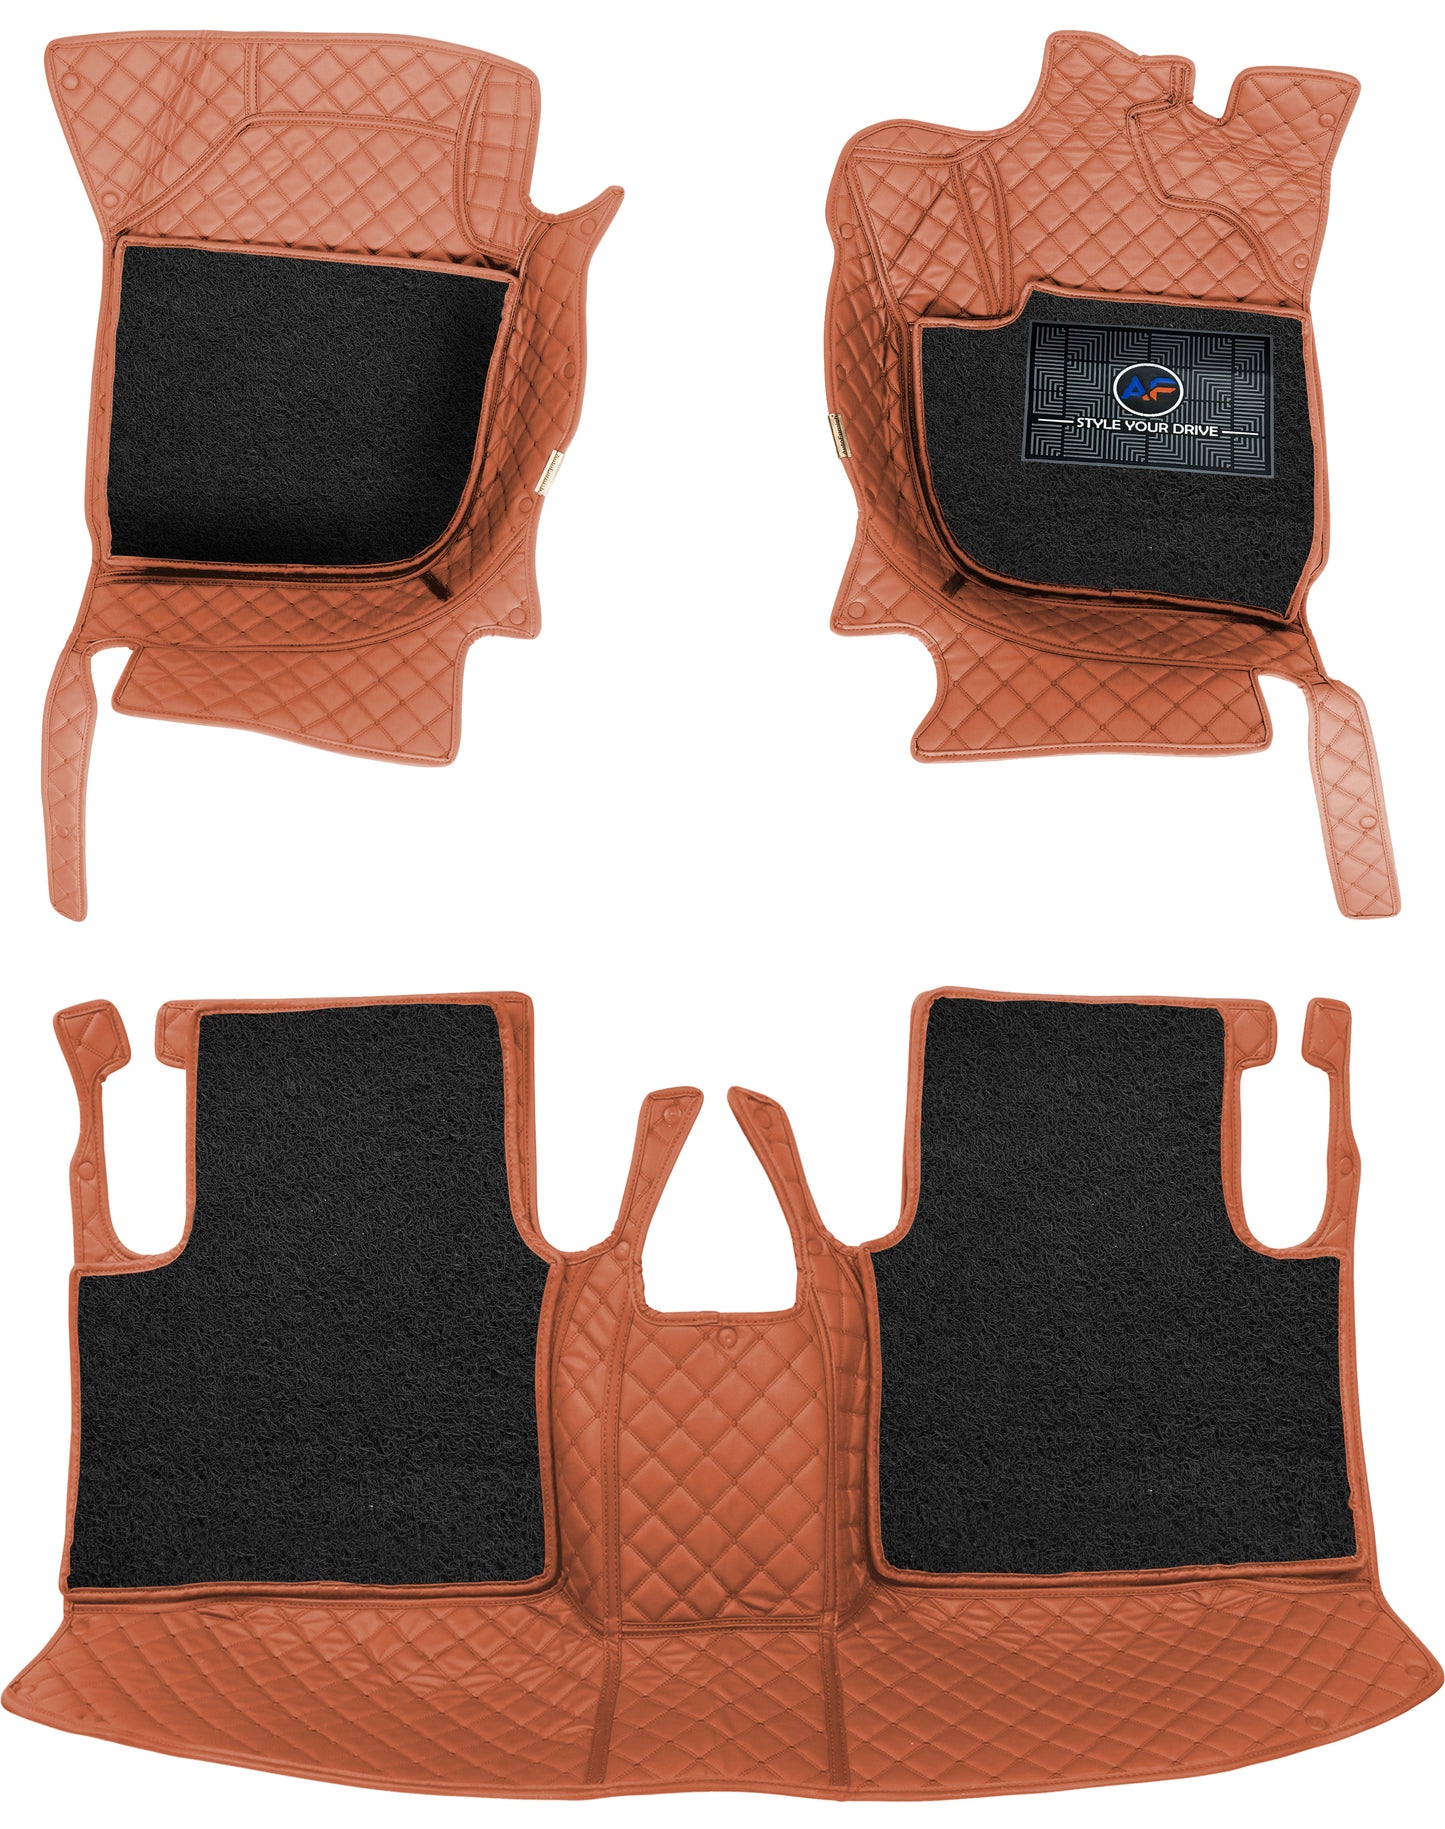 Maruti Swift (2014-17)7D Luxury Car Mat, All Weather Proof, Anti-Skid, 100% Waterproof & Odorless with Unique Diamond Fish Design (24mm Luxury PU Leather, 2 Rows)